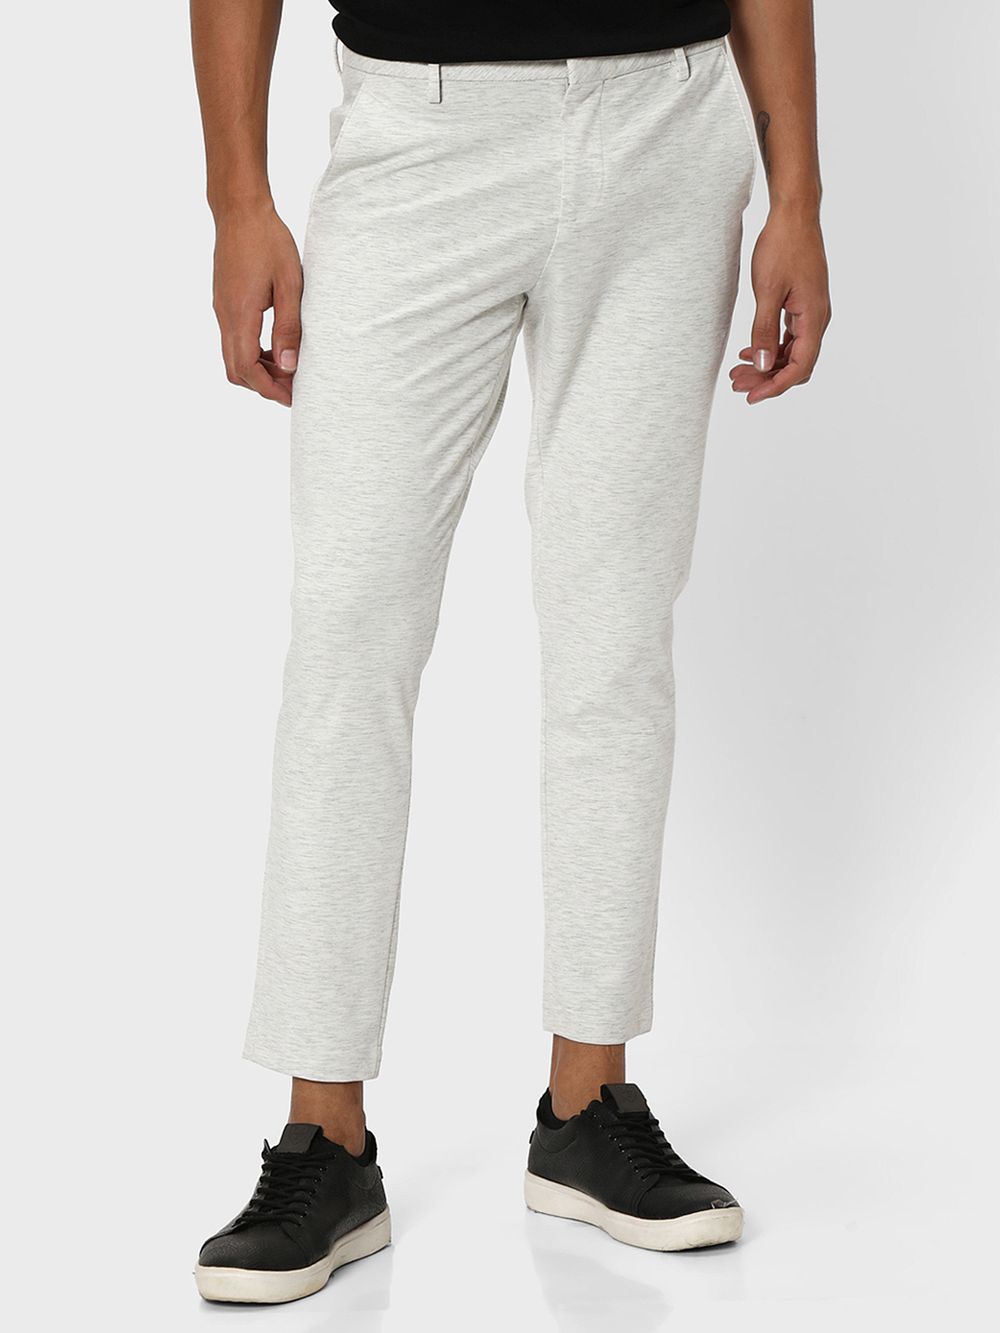 Light Grey Ankle Length Stretch Chinos Trouser